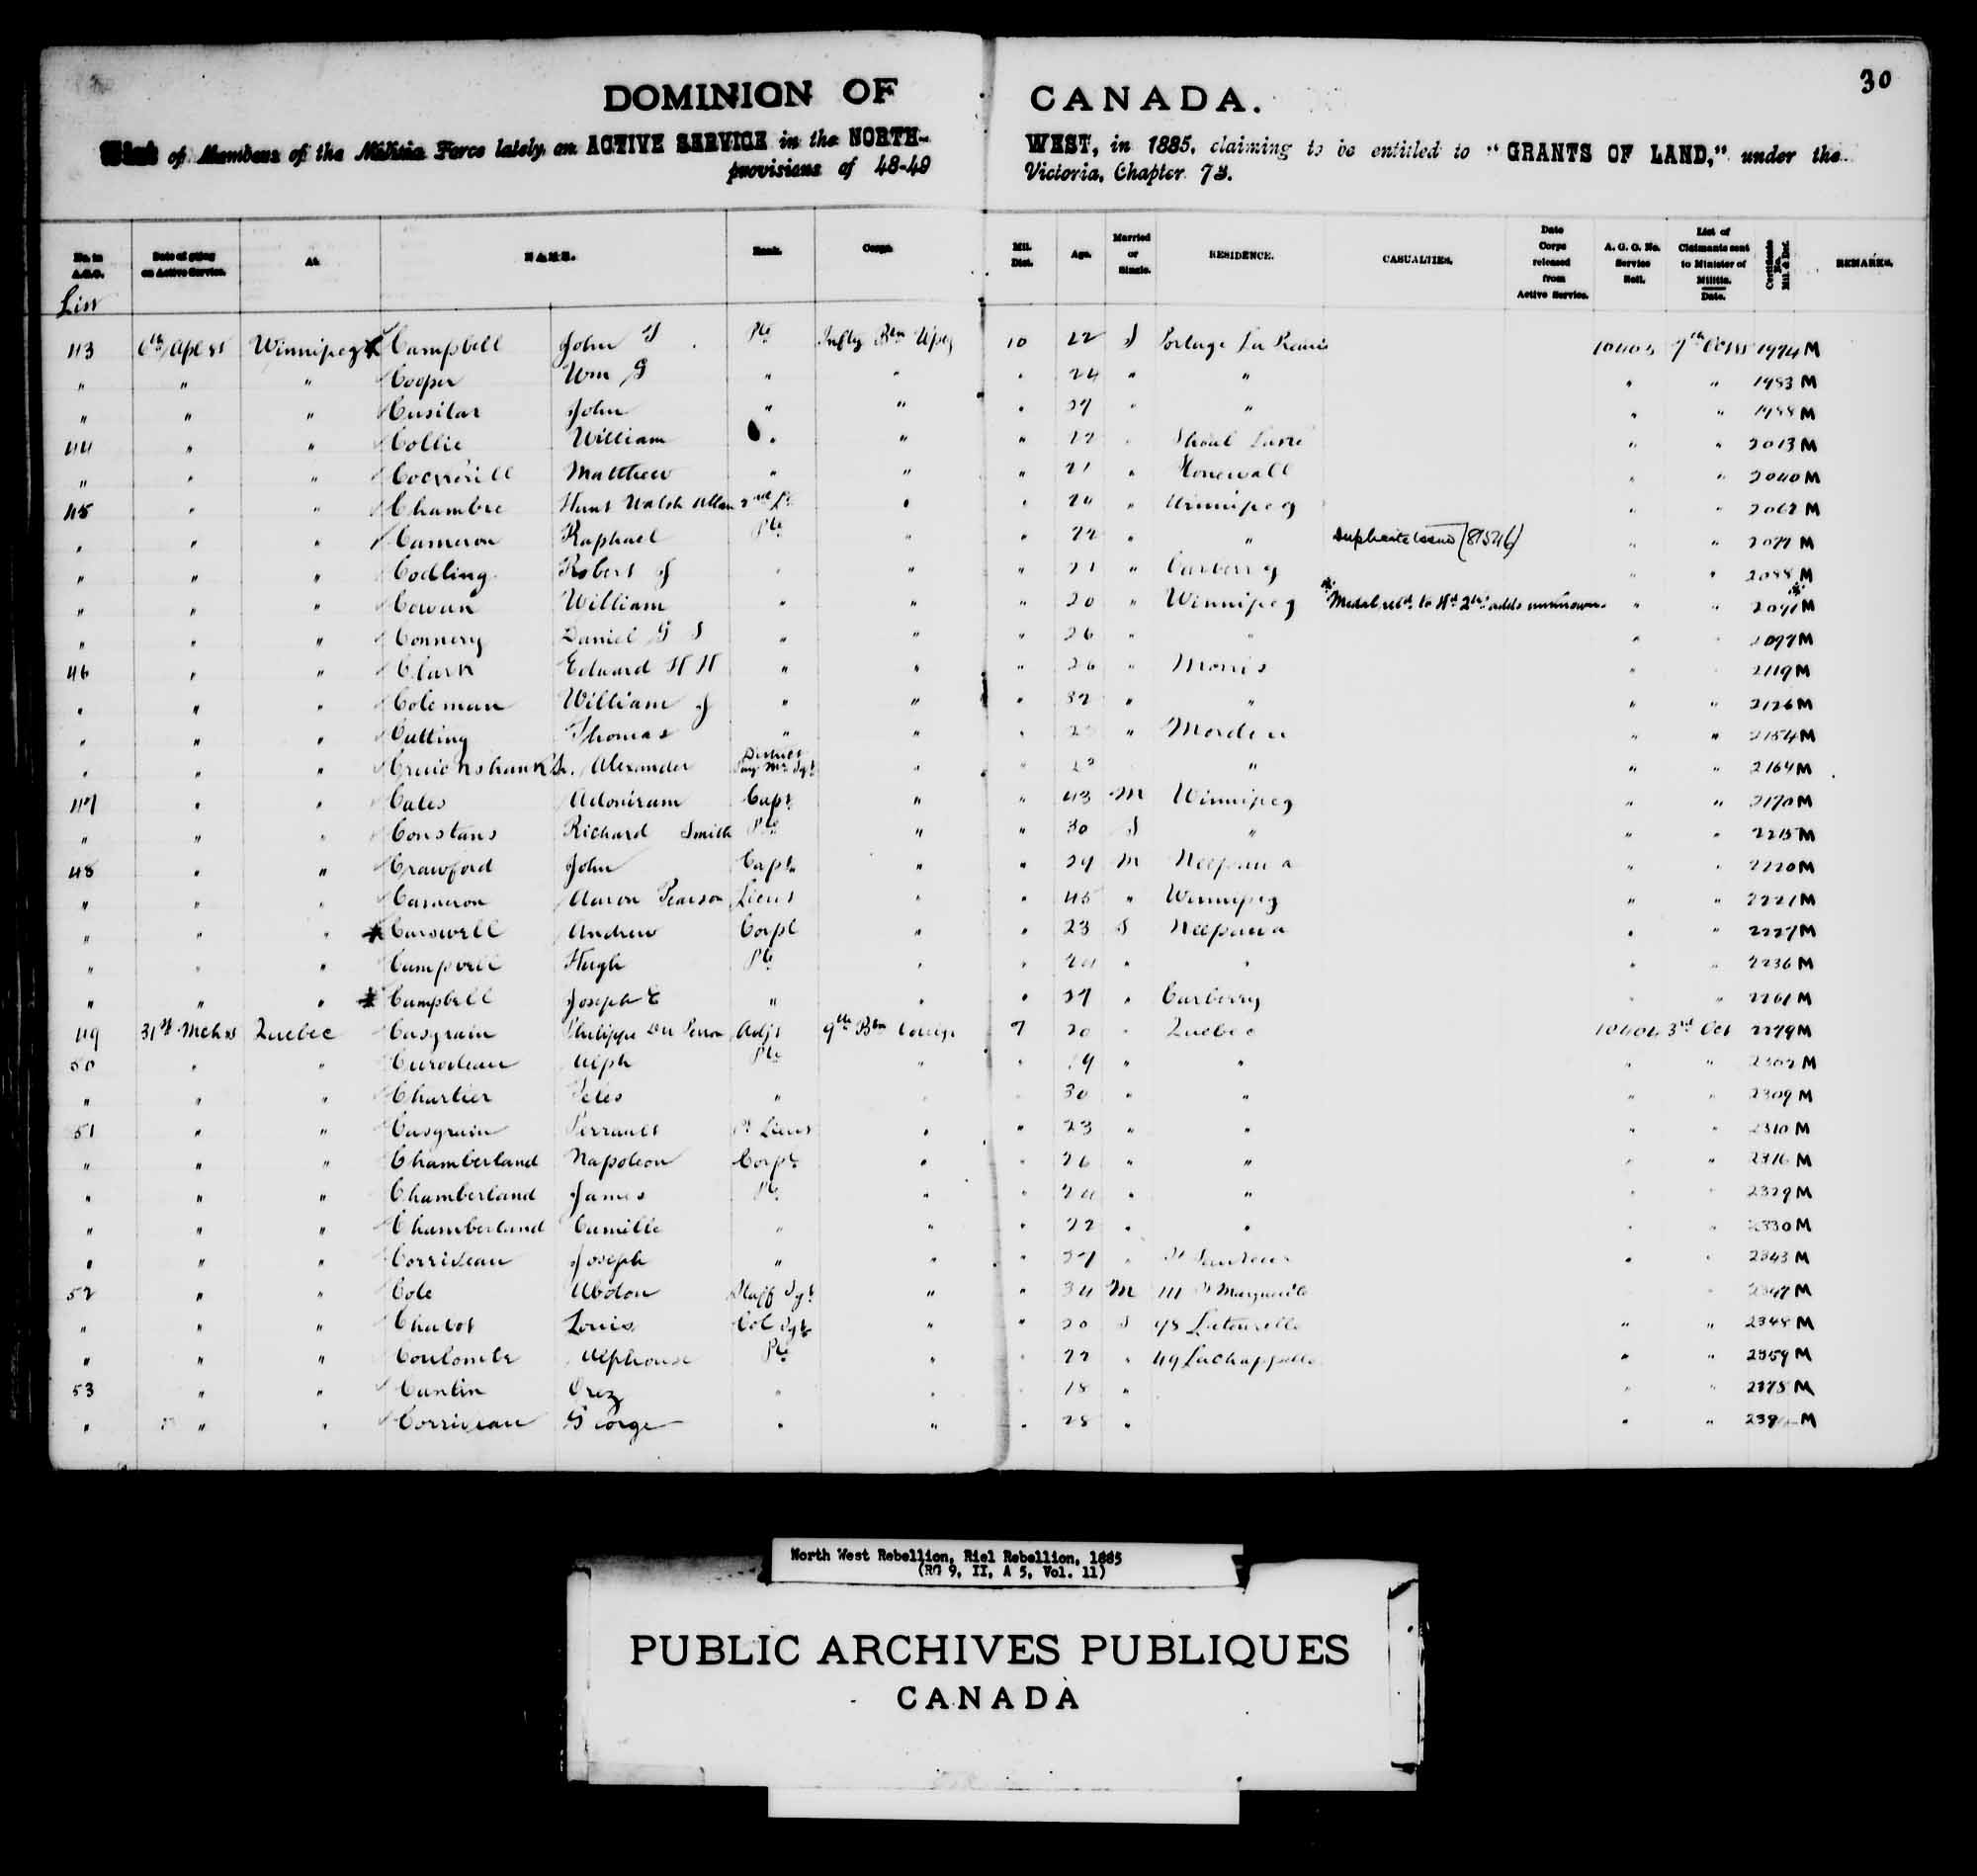 Digitized page of Medals, Honours and Awards for Image No.: e008683618